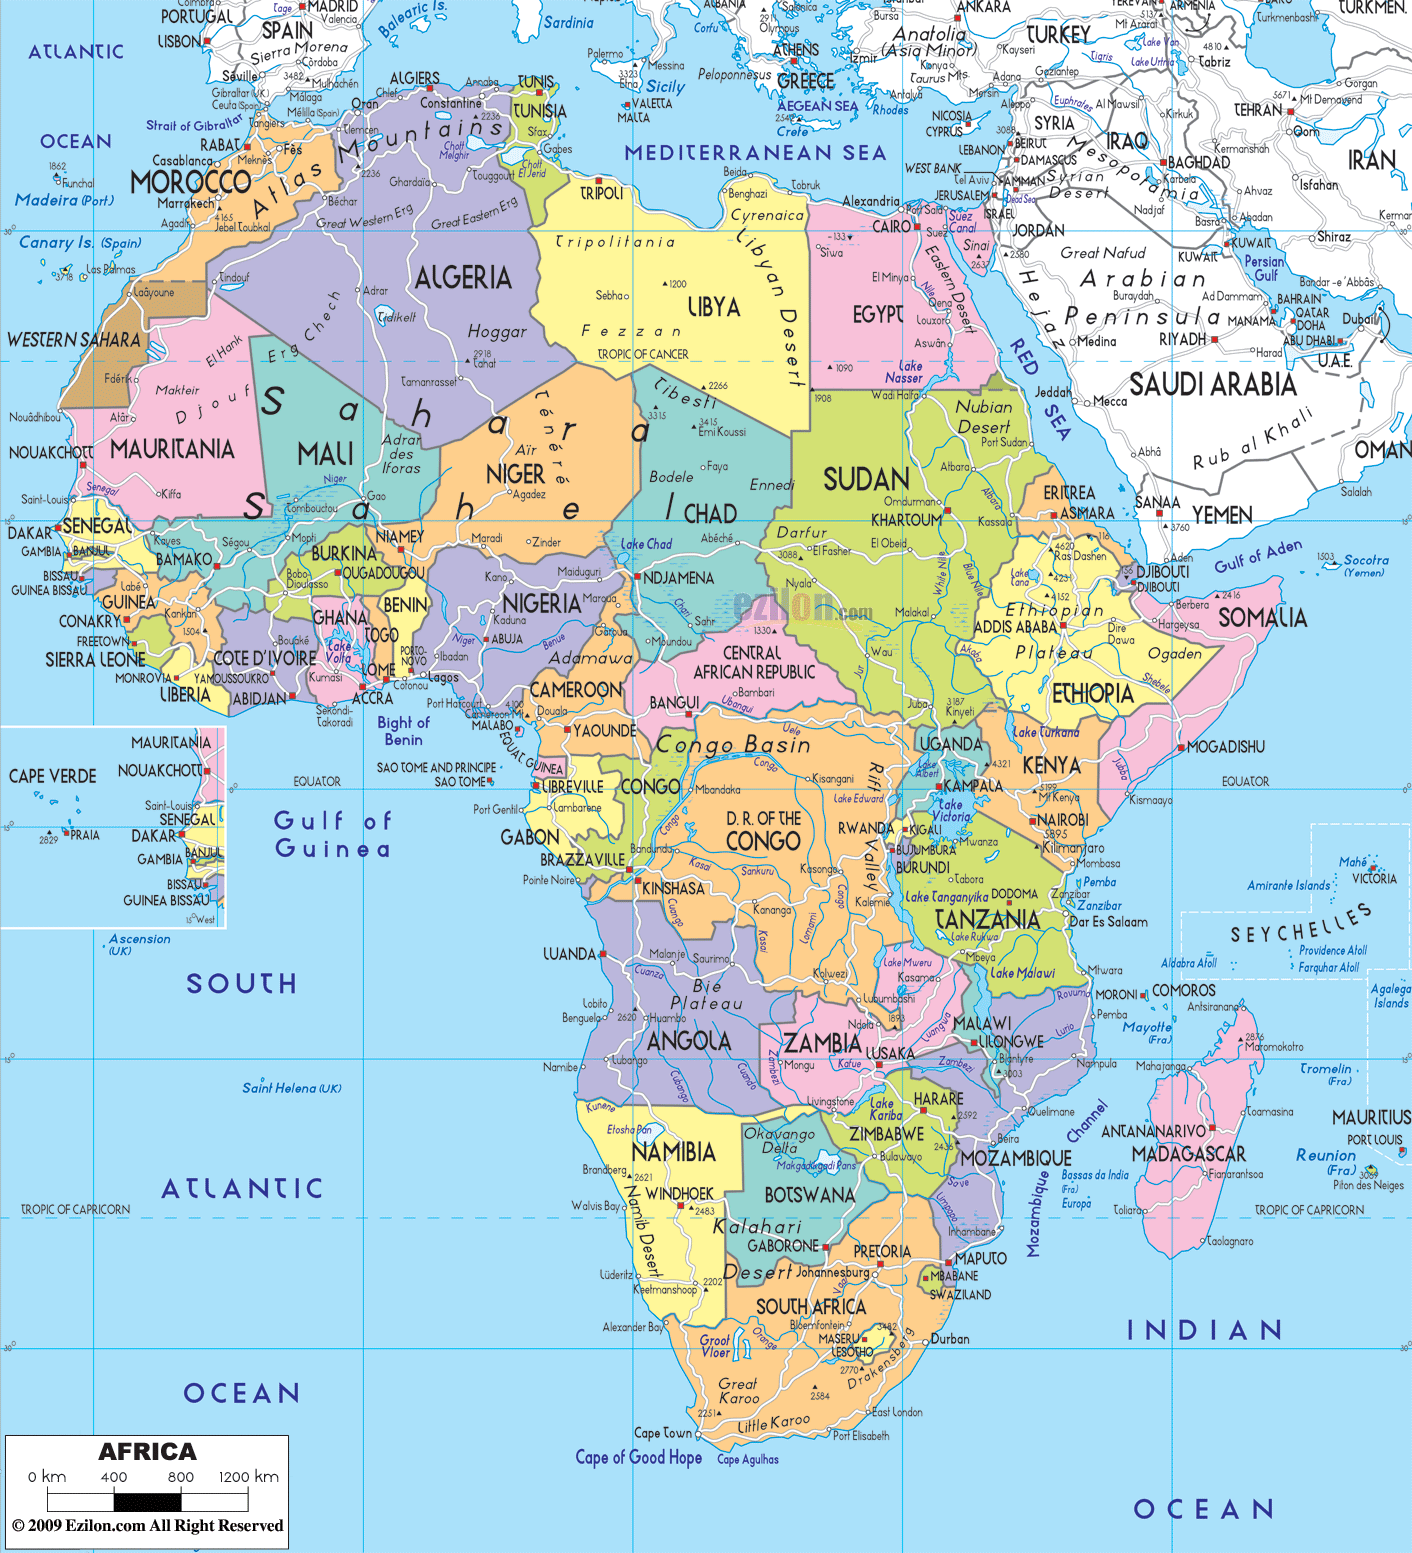 Political instability in modern african state